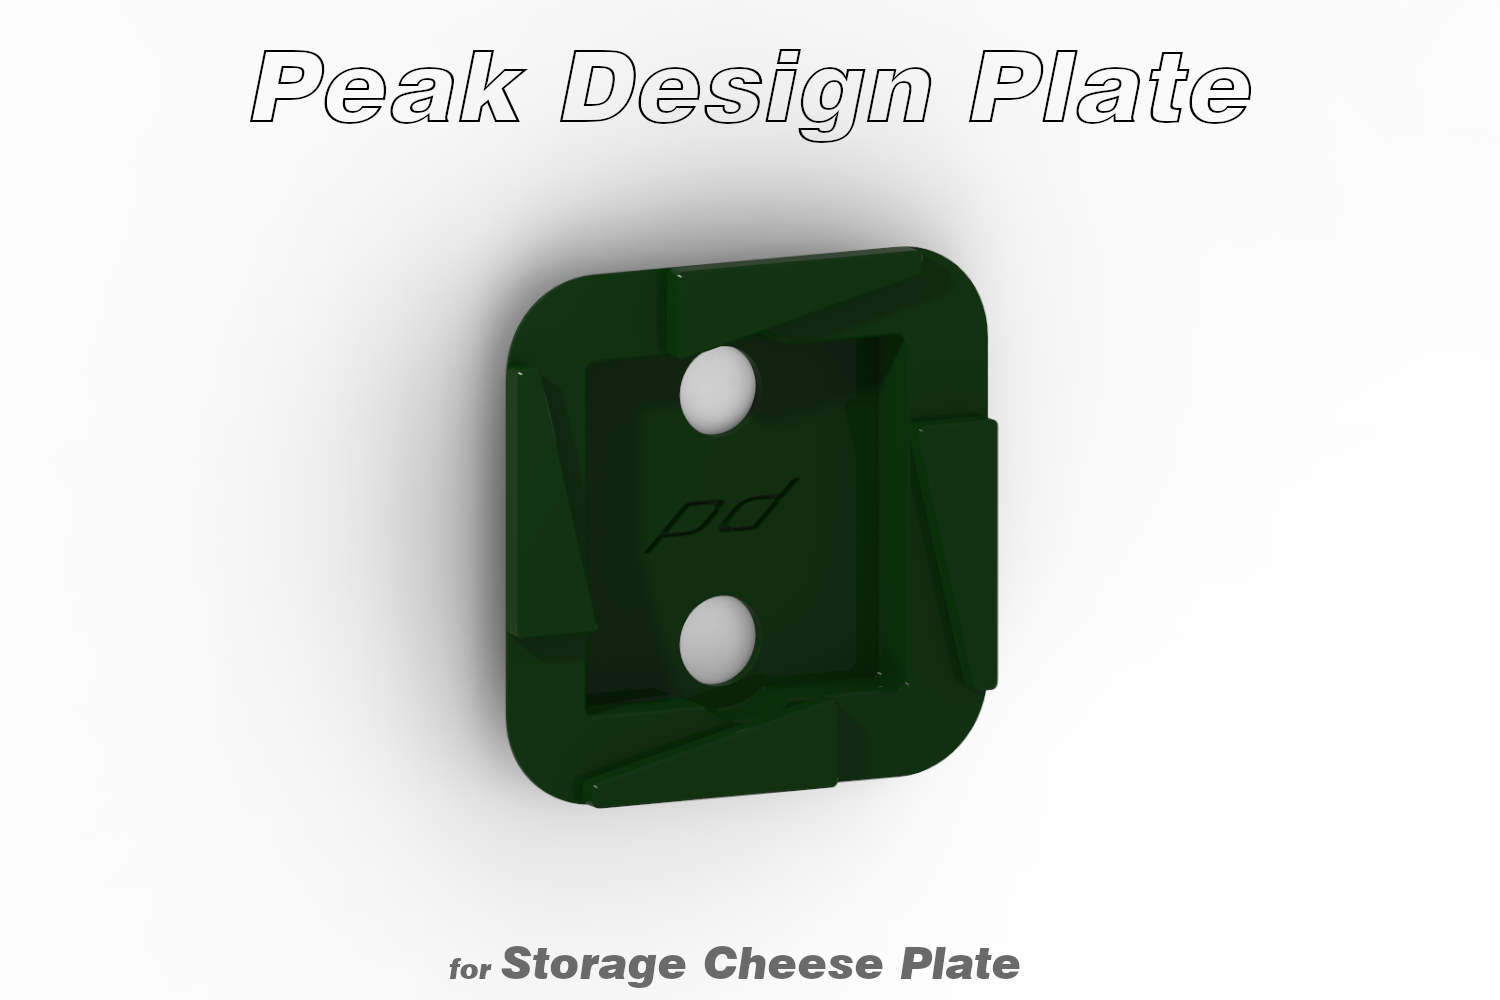 Peak Design Plate (for Storage Cheese Plate)